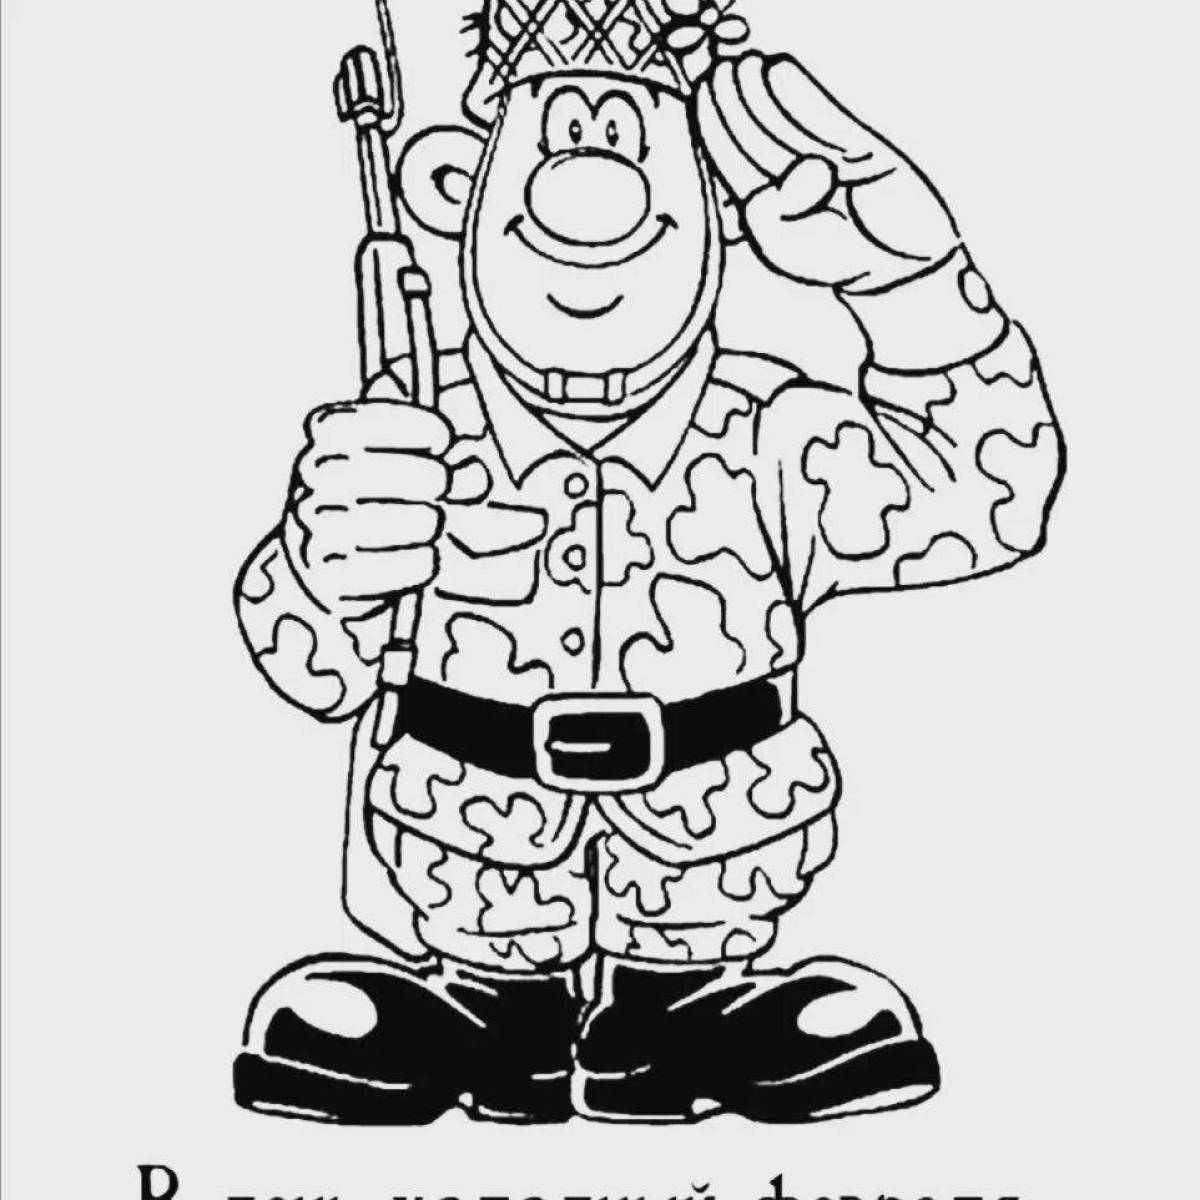 Animated coloring pages of toy soldiers